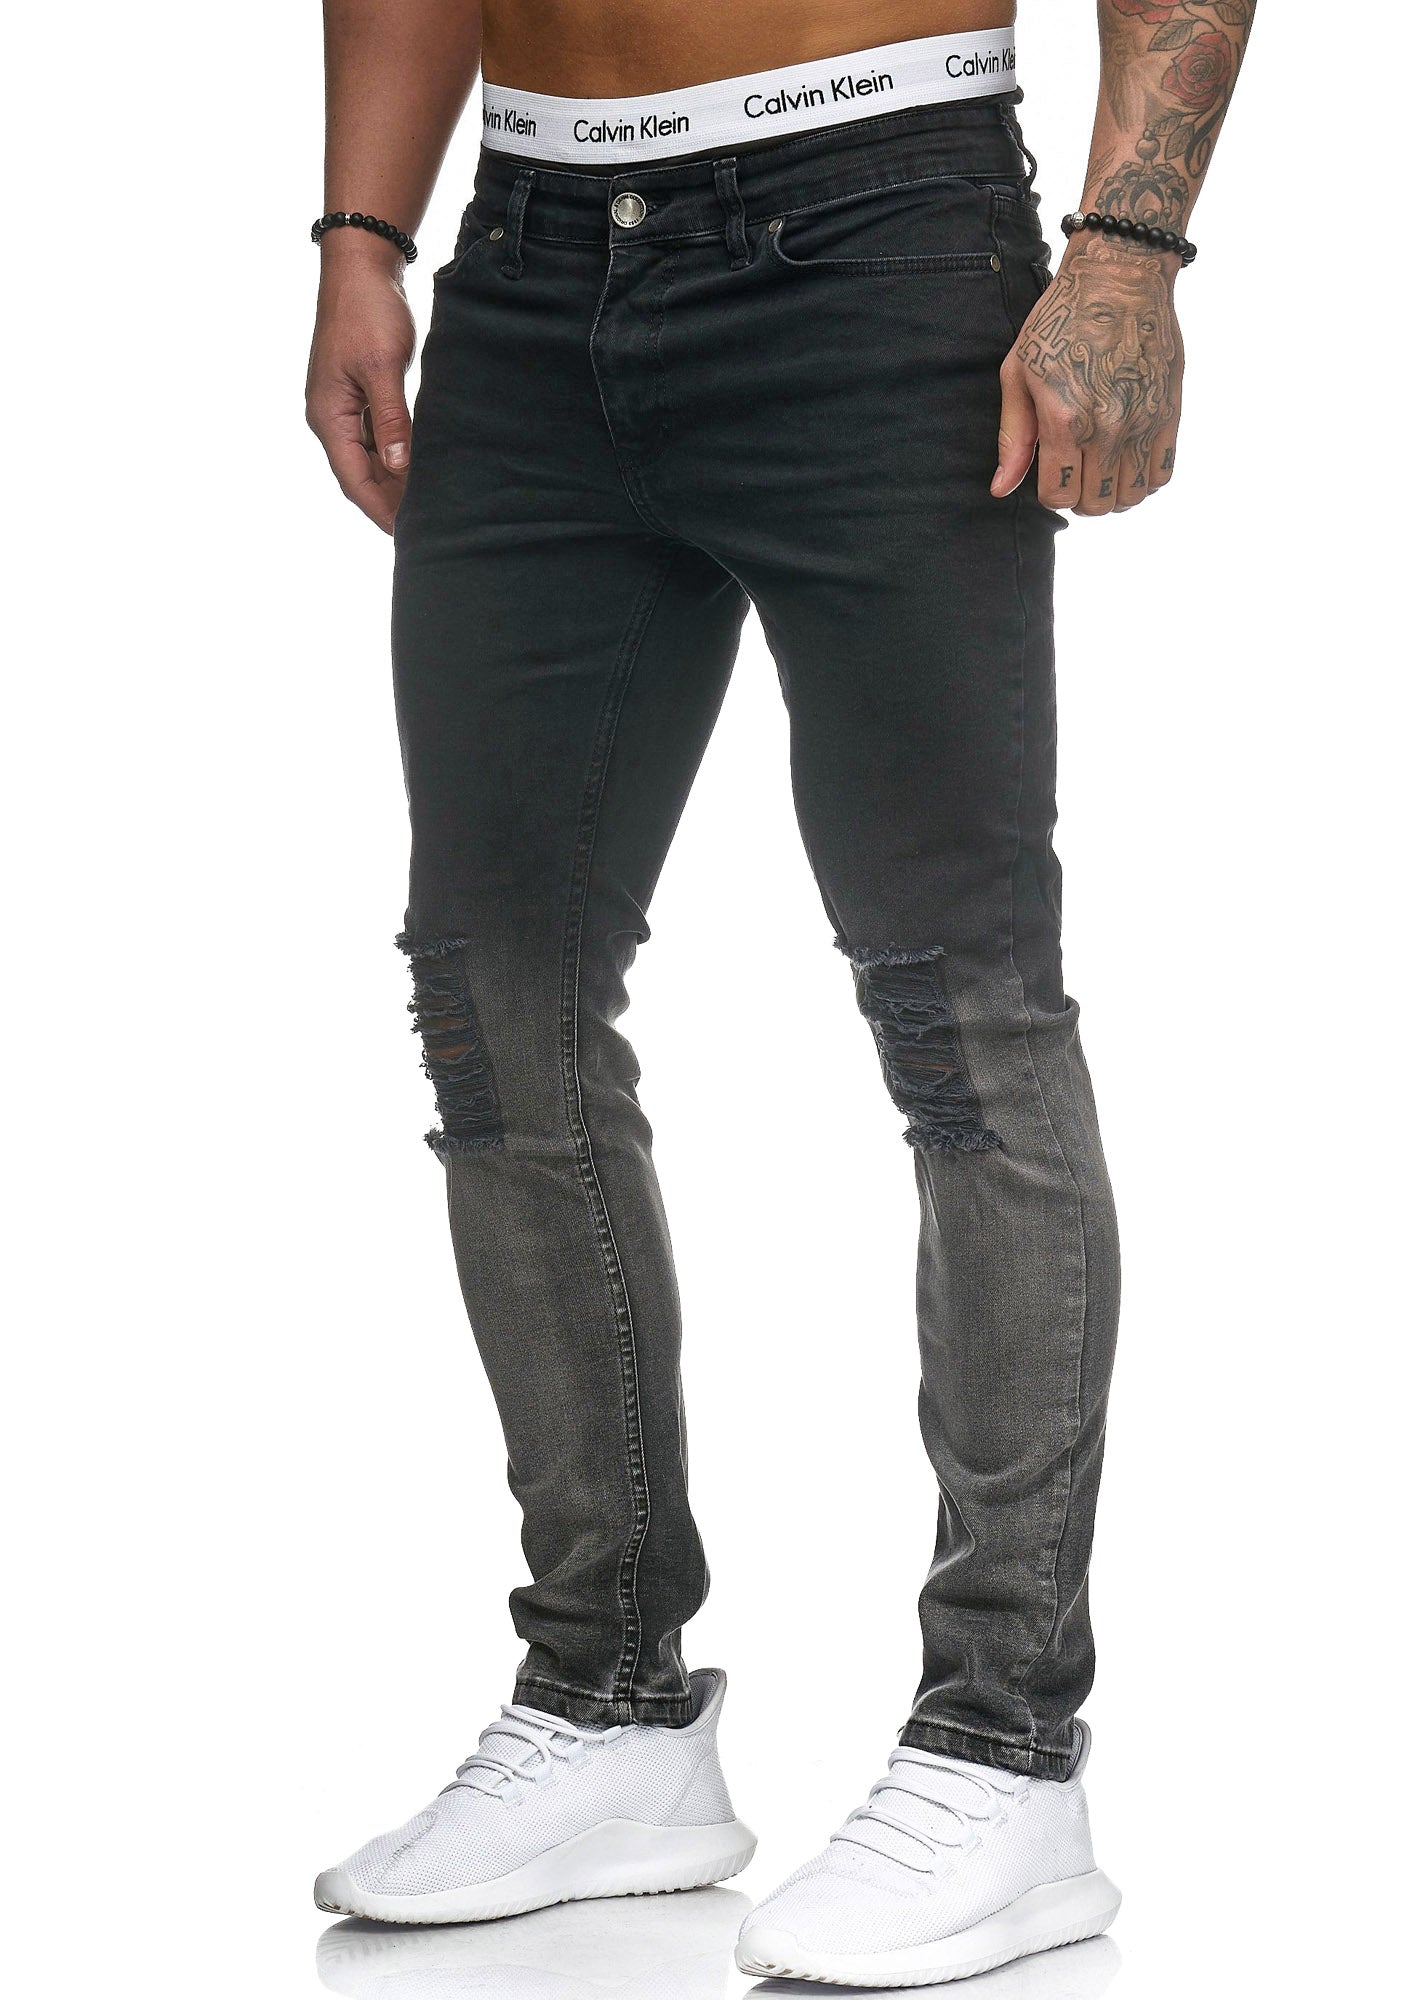 Scrapped Knees Fading Skinny Ripped Distressed Jeans - Black X3 - FASH STOP